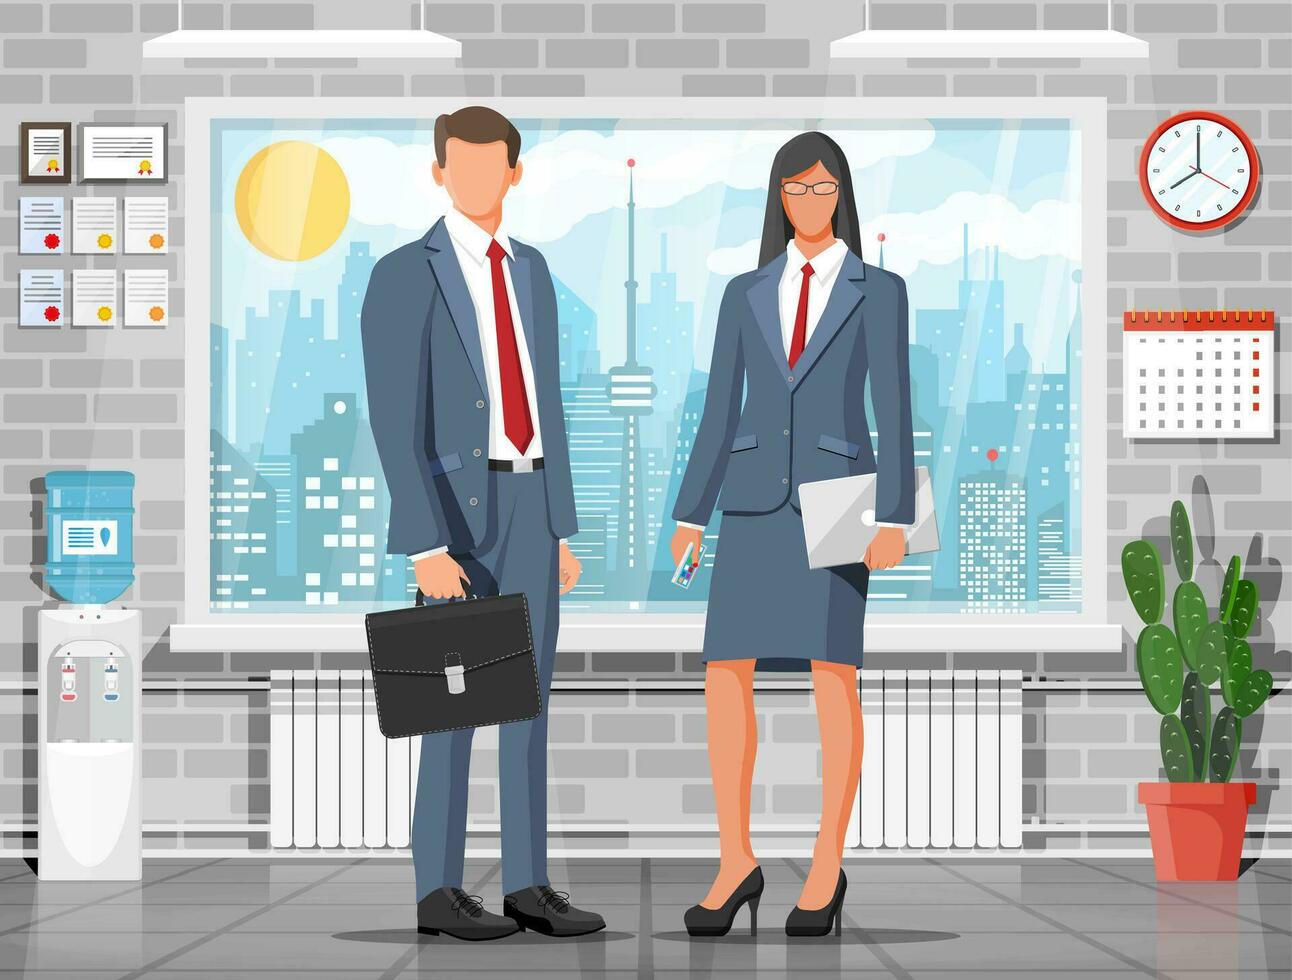 Office interior with businesswoman and businessman. Business people at workspace. Drawer, tree, clocks, calendar, printer. Modern business workplace. Cartoon flat vector illustration